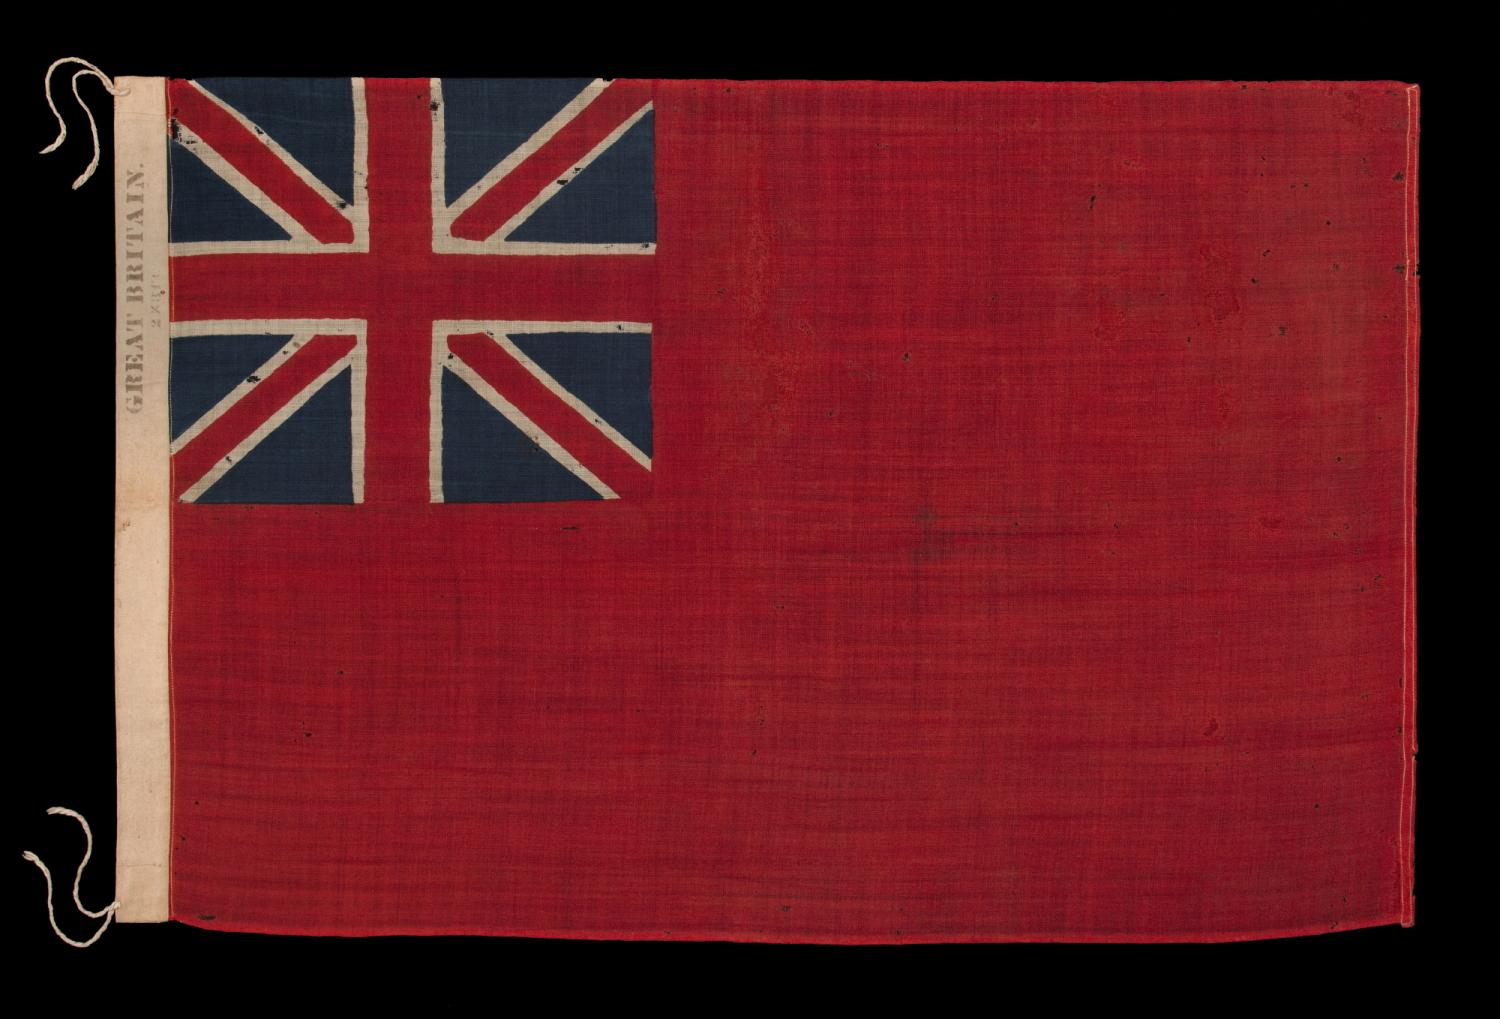 RARE BRITISH RED ENSIGN OF THE LATTER 19TH CENTURY, MADE BY HORSTMANN & BROTHERS COMPANY OF PHILADELPHIA FOR DISPLAY AT THE 1876 CENTENNIAL INTERNATIONAL EXHIBITION, ONE OF TWO KNOWN EXAMPLES